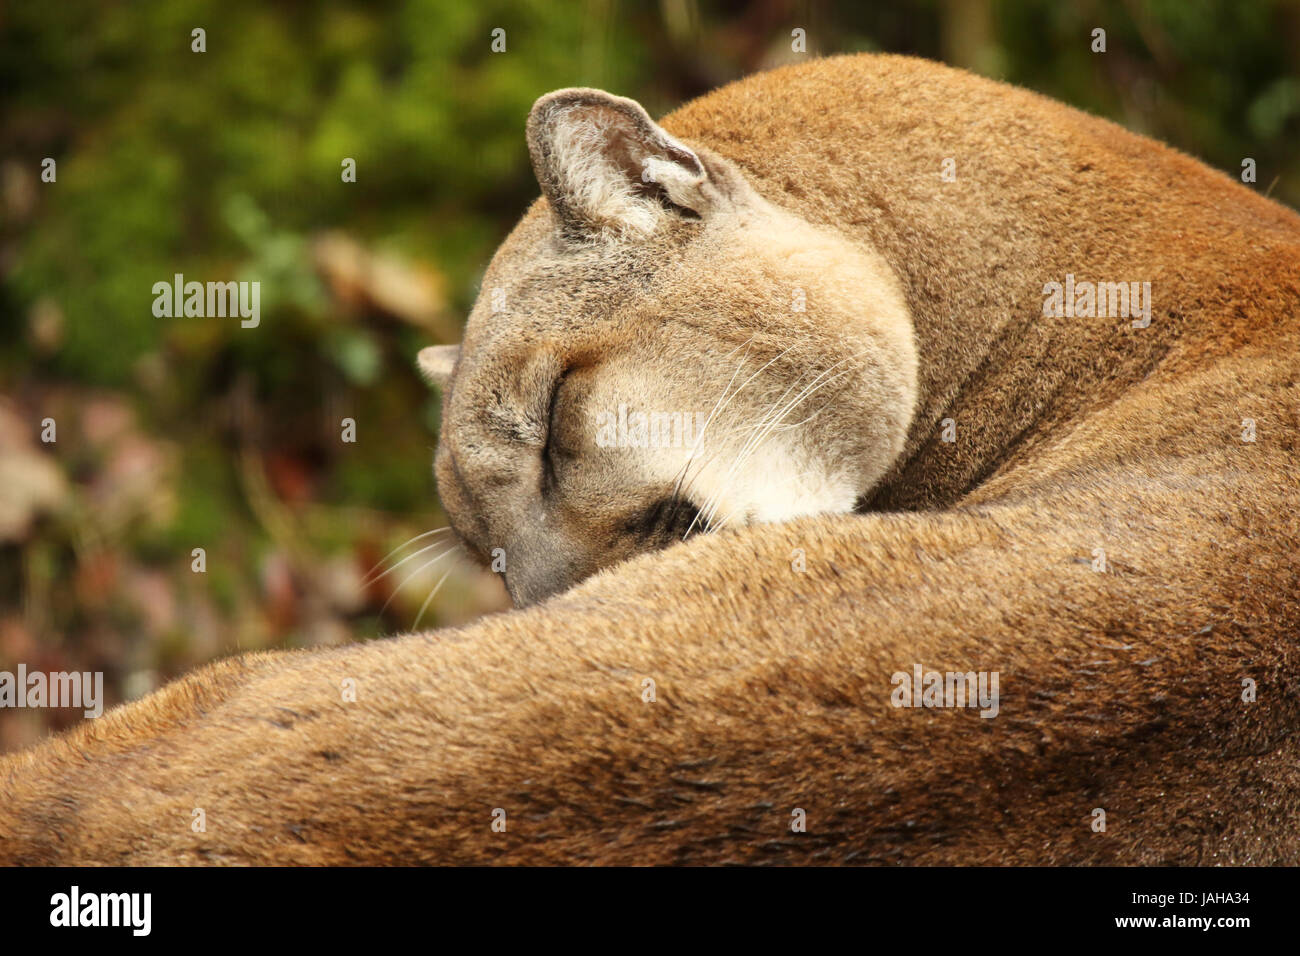 A cougar curled up while grooming. Stock Photo